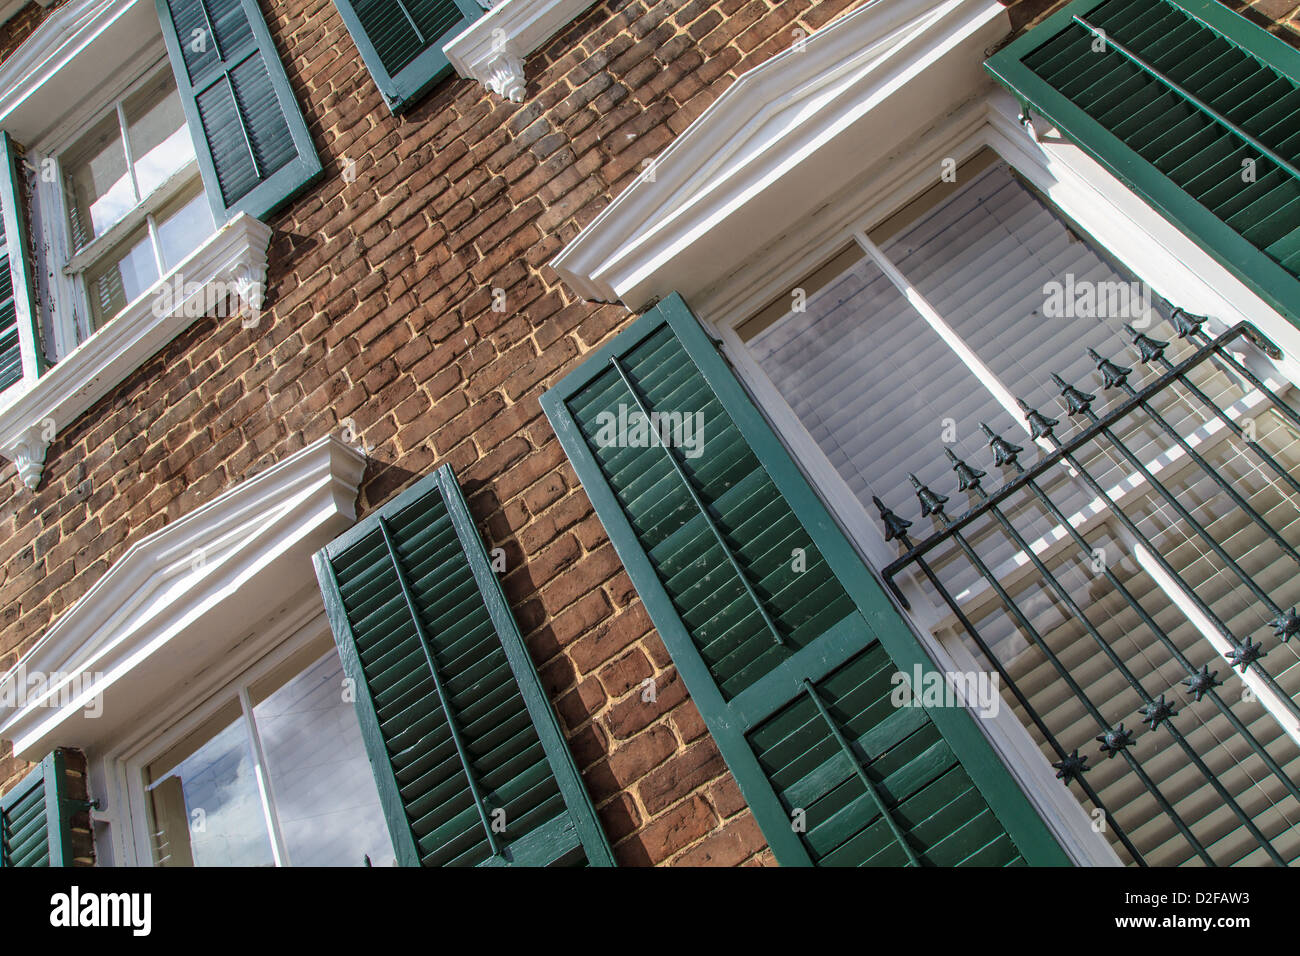 Georgian Style House Facade with green window shutters Stock Photo